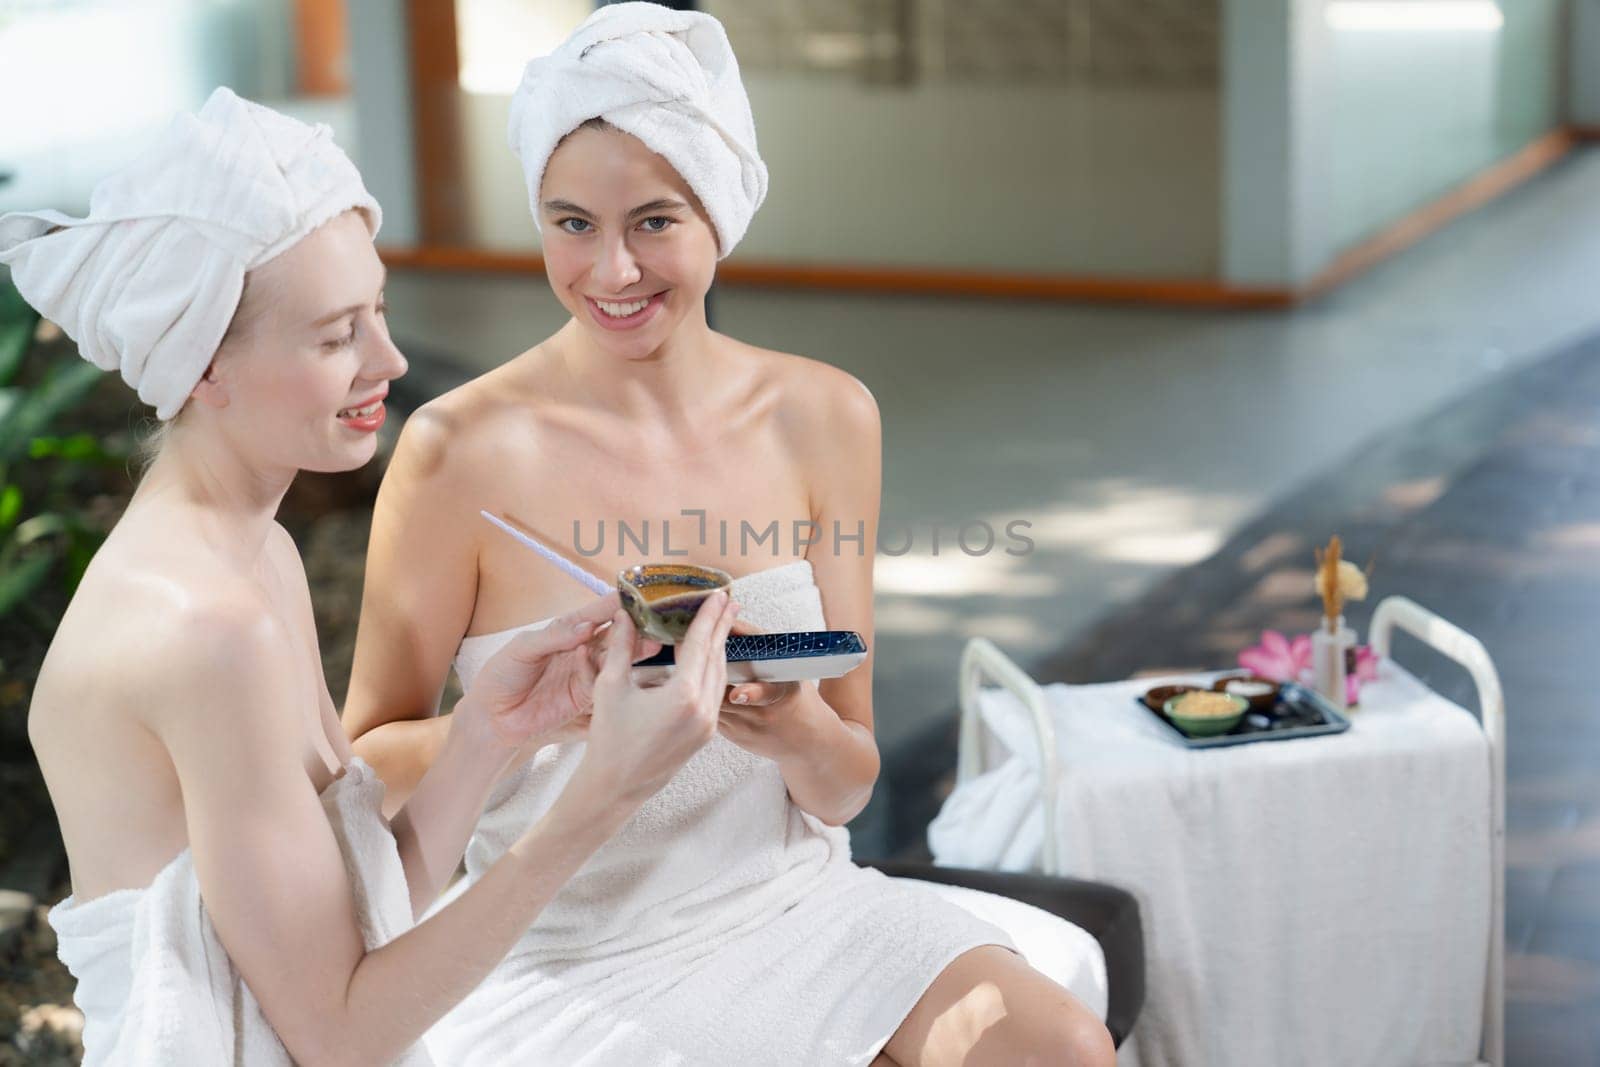 A portrait of two spa girls in white towel looking at camera while holding the homemade facial mask at outdoor surrounded by peaceful natural environment. Healthy and beauty concept. Tranquility.